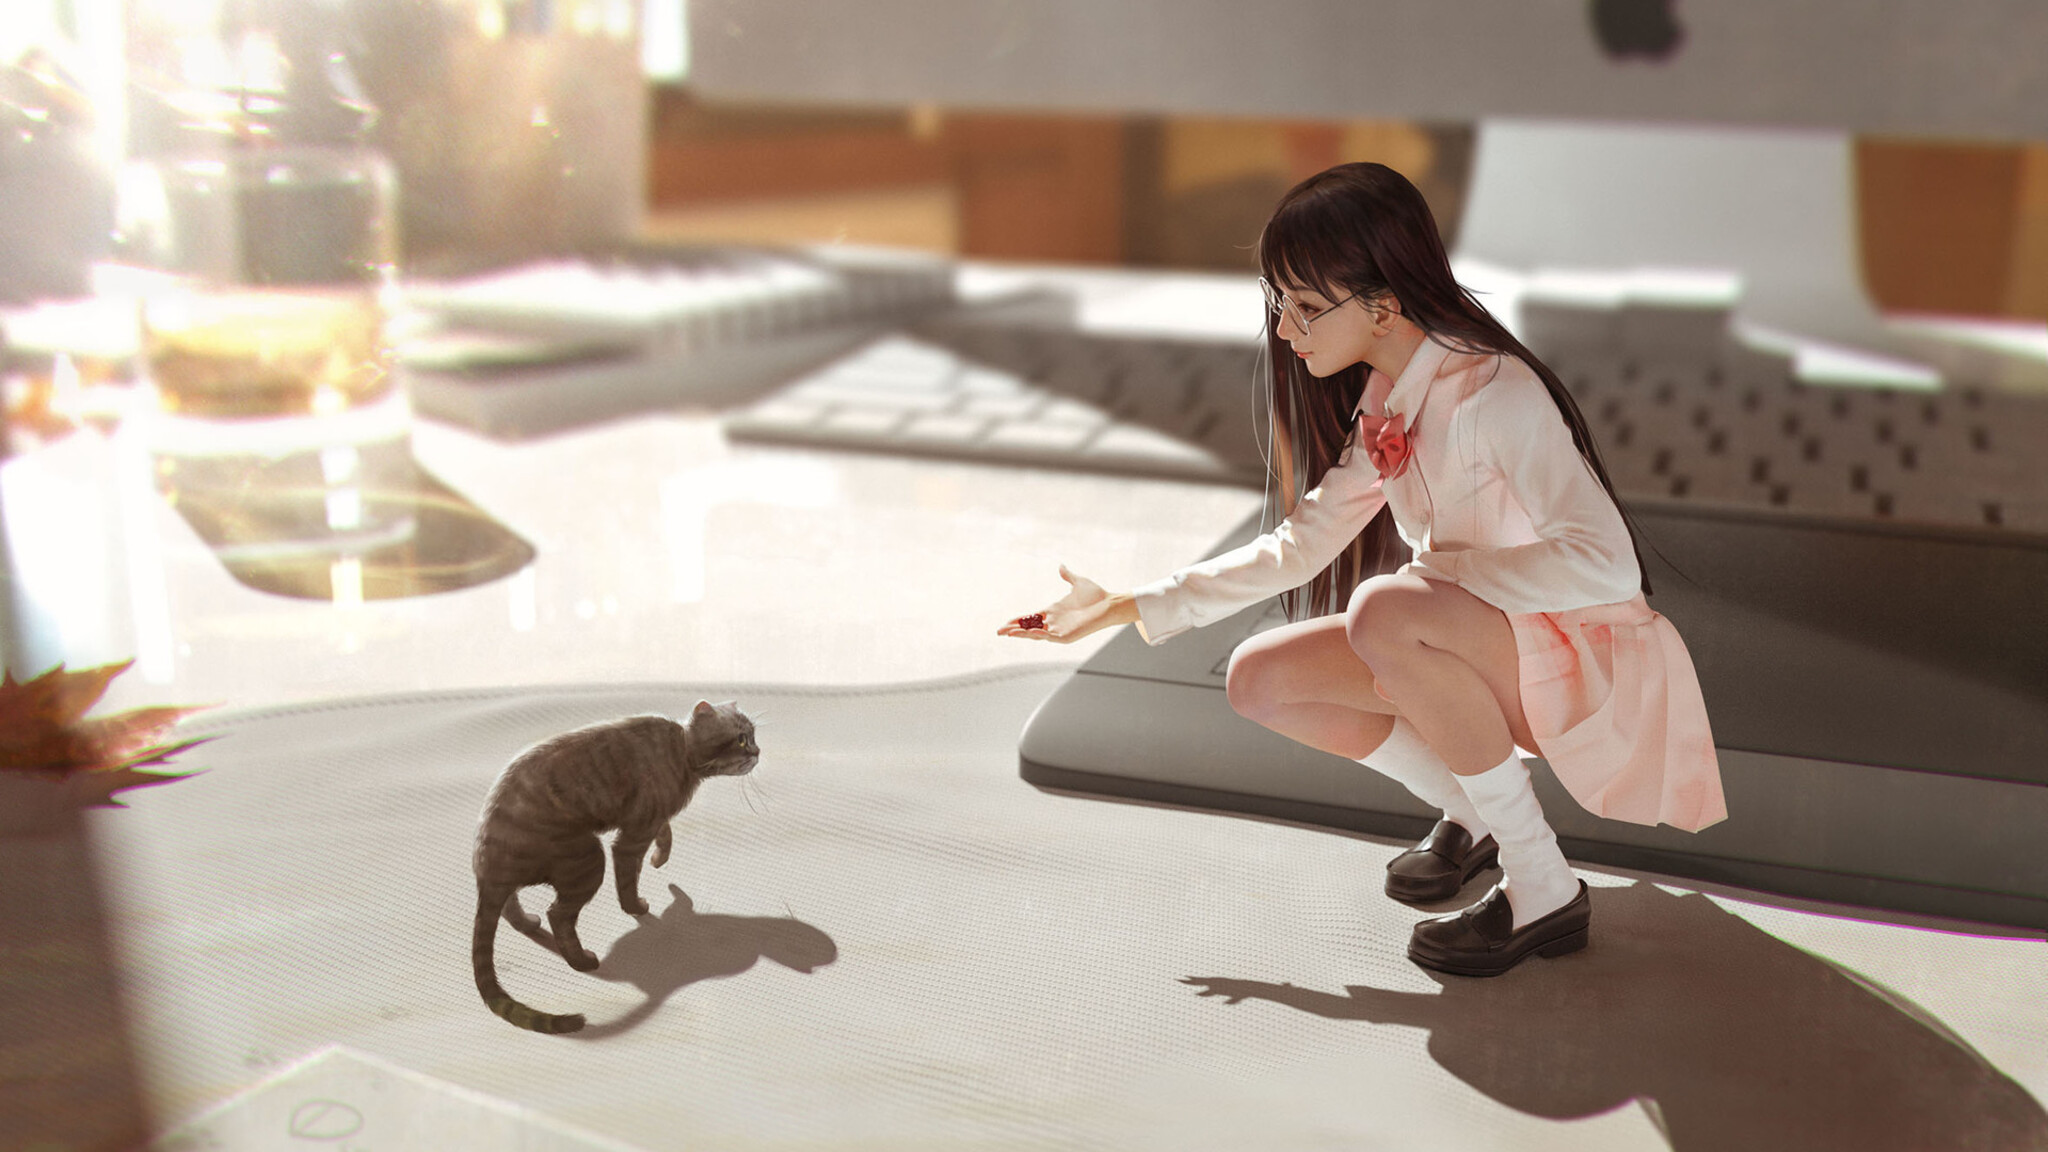 A girl in a pink dress playing with a cat. - Cat